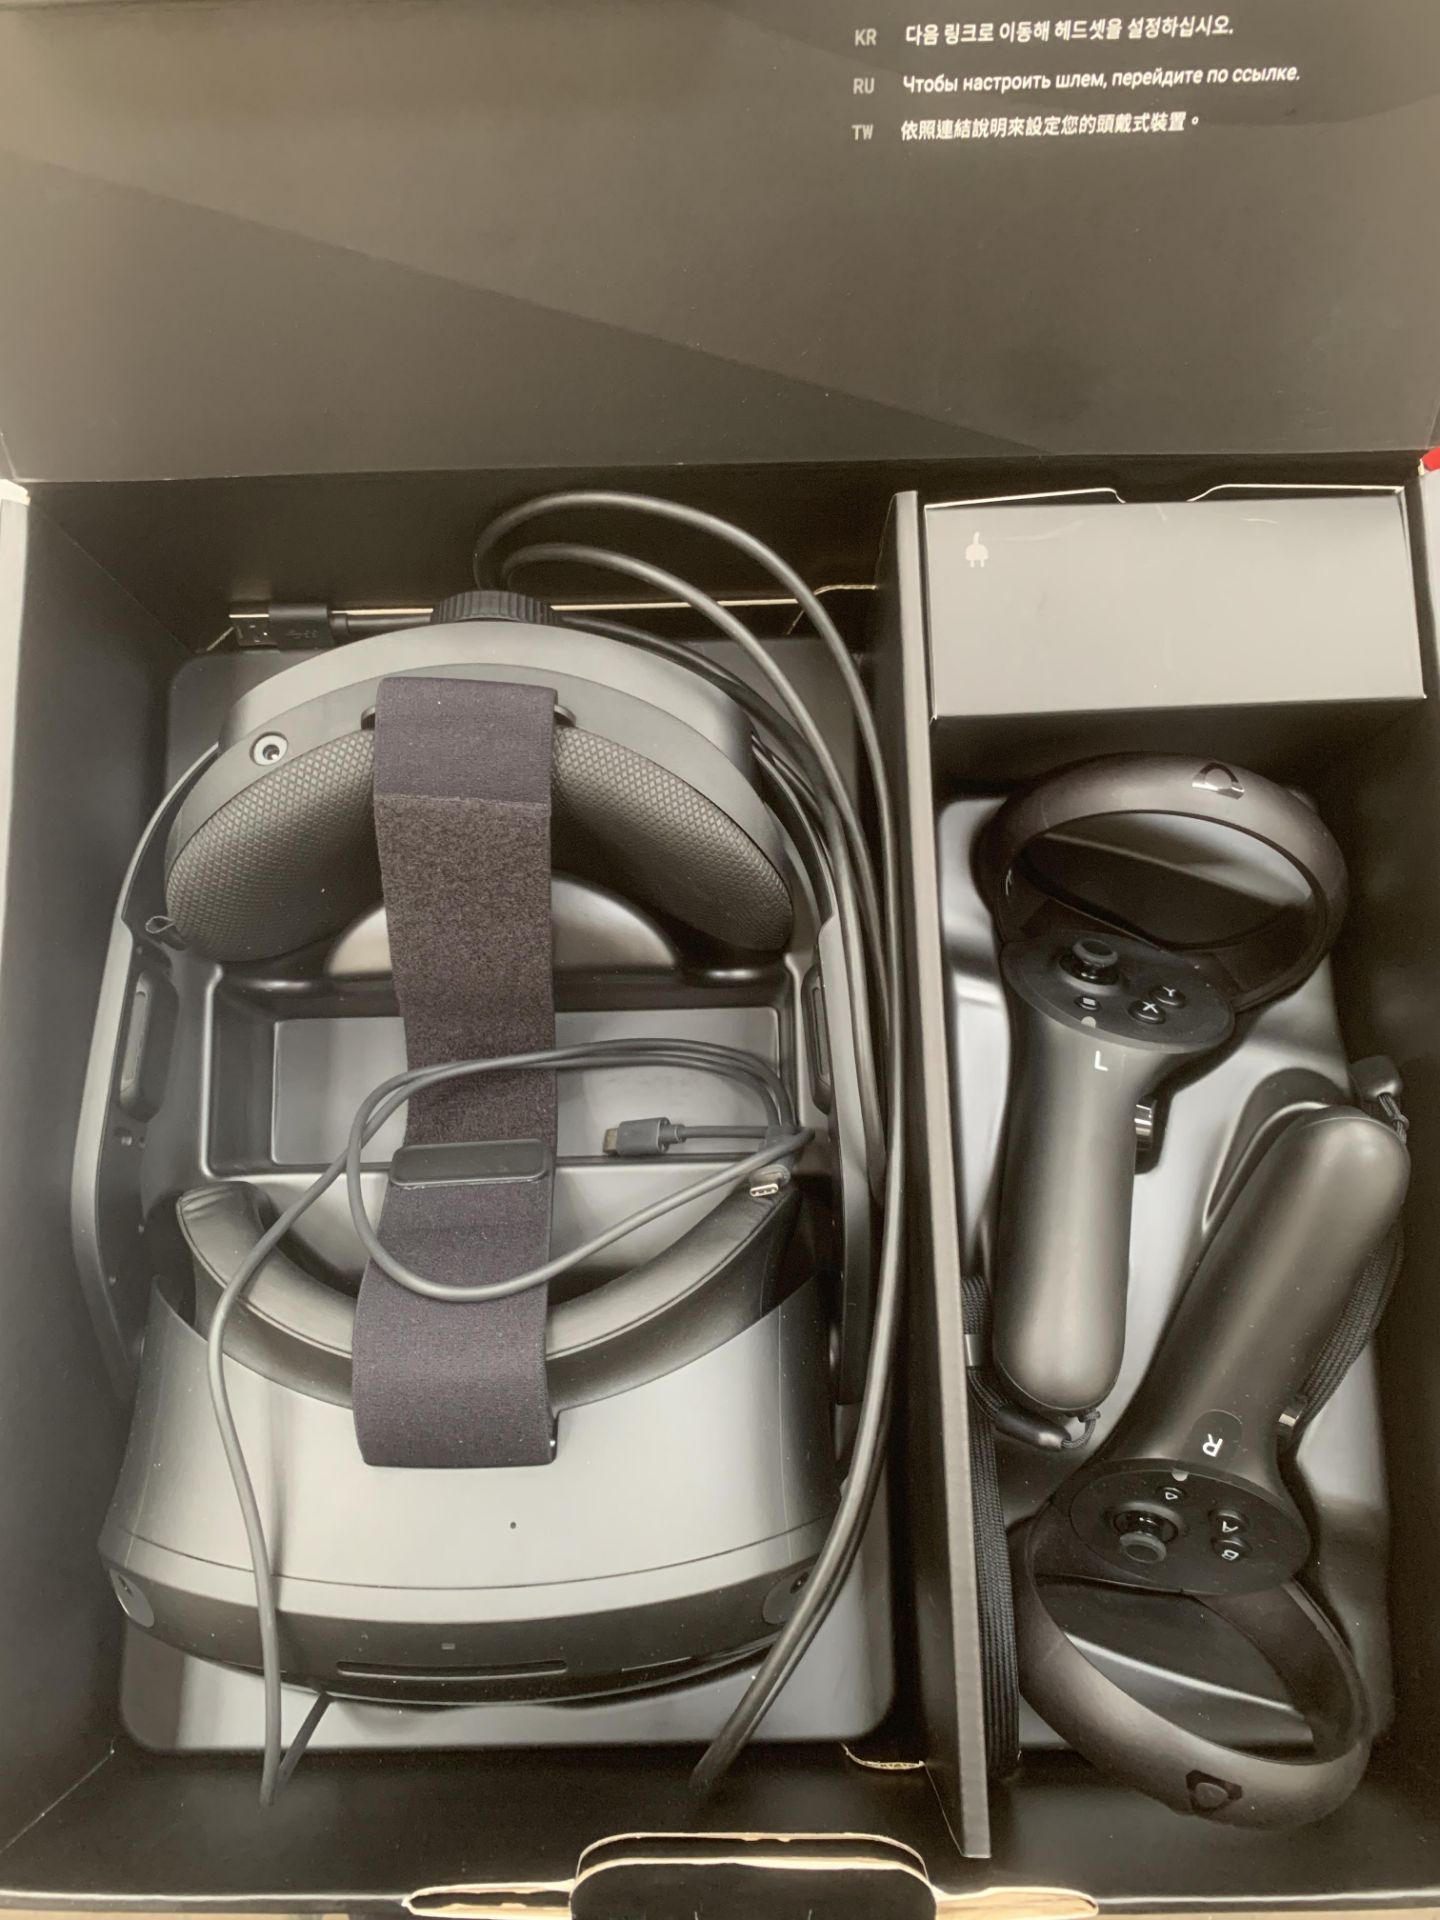 HTC Vive 3 VR Headset - Boxed